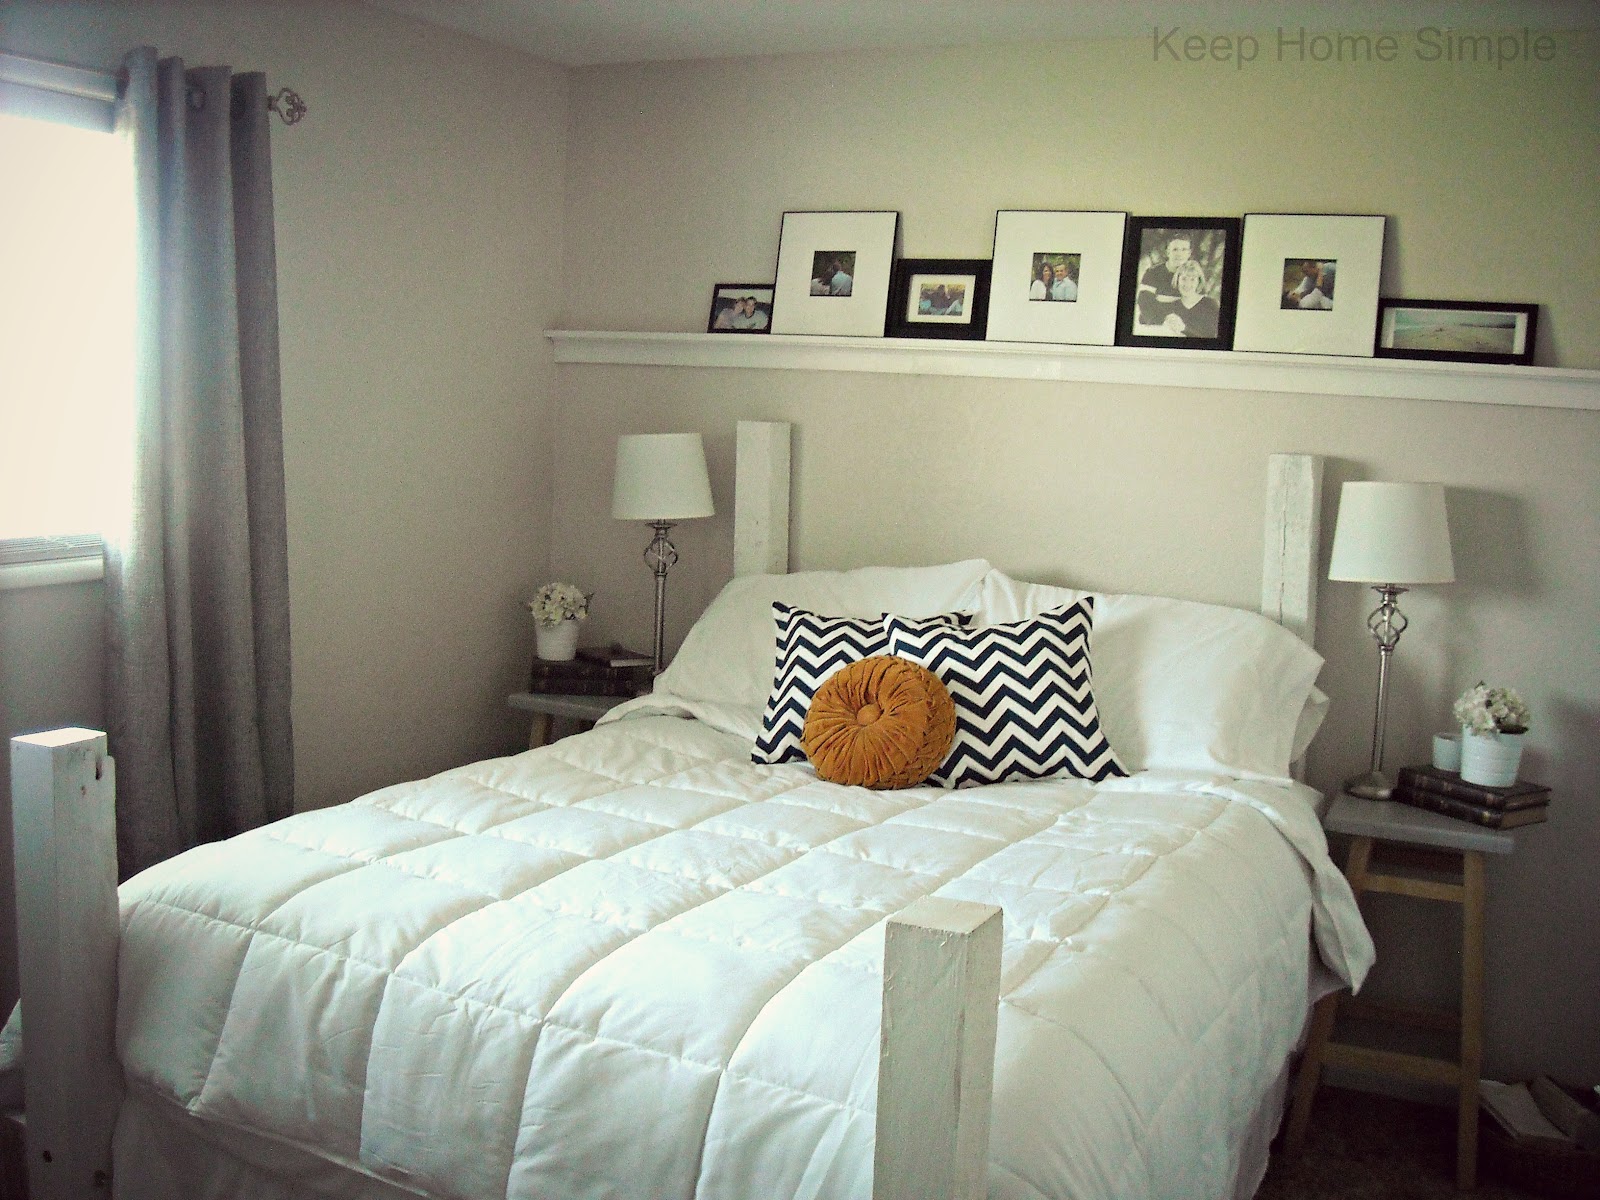 Keep Home Simple: Redecorating Our Masterbedroom on a ...